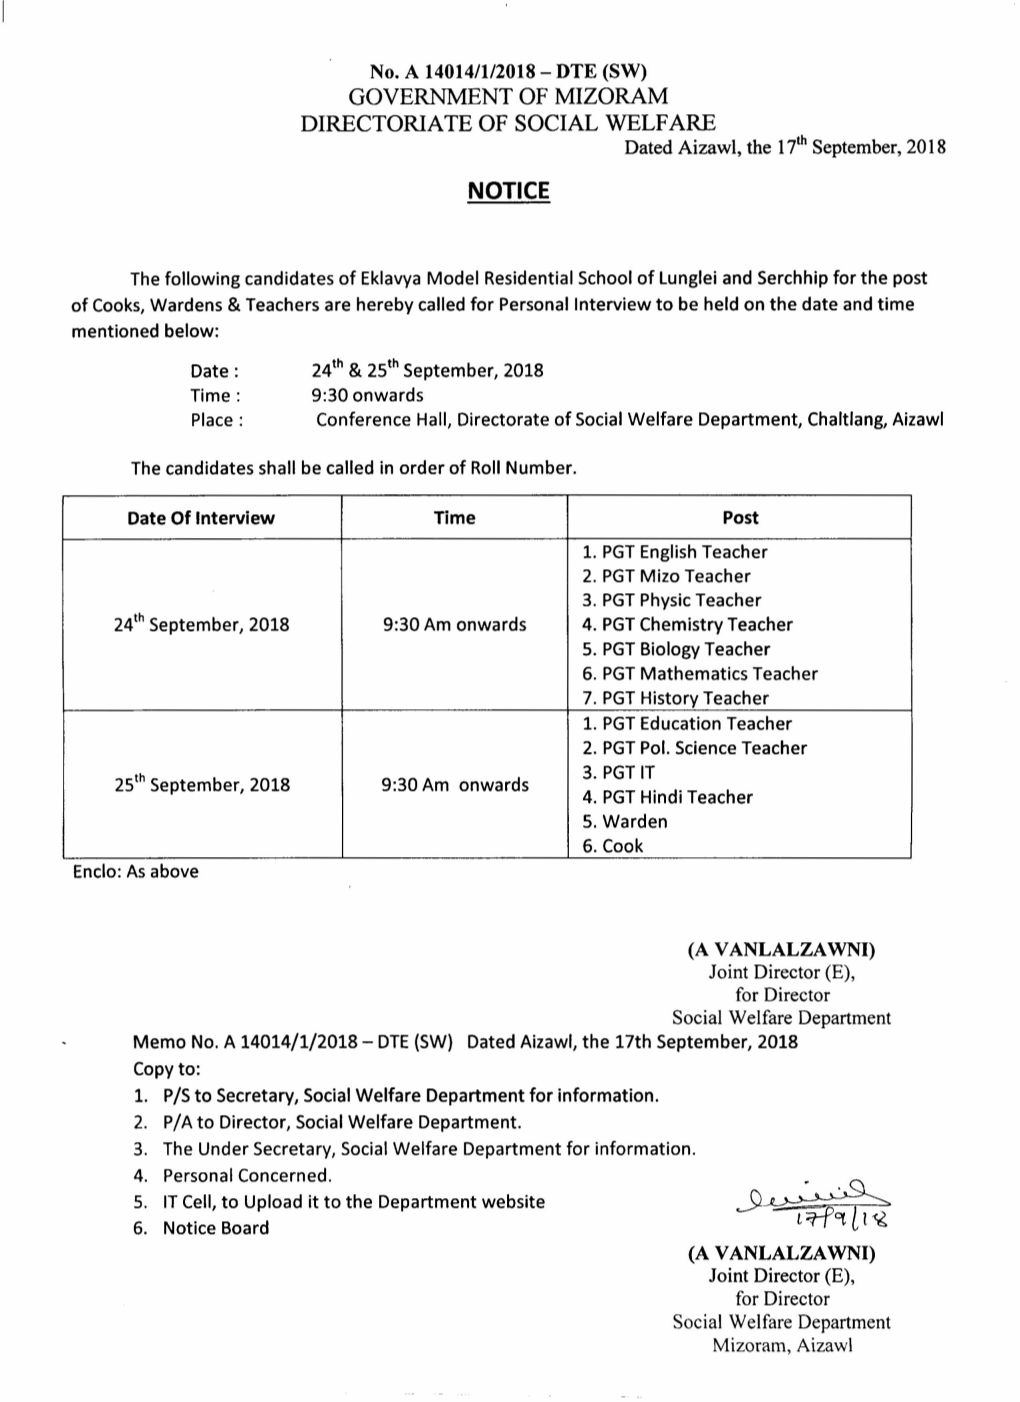 Notice for EMRS Lunglei & Serchhip Personal Interview